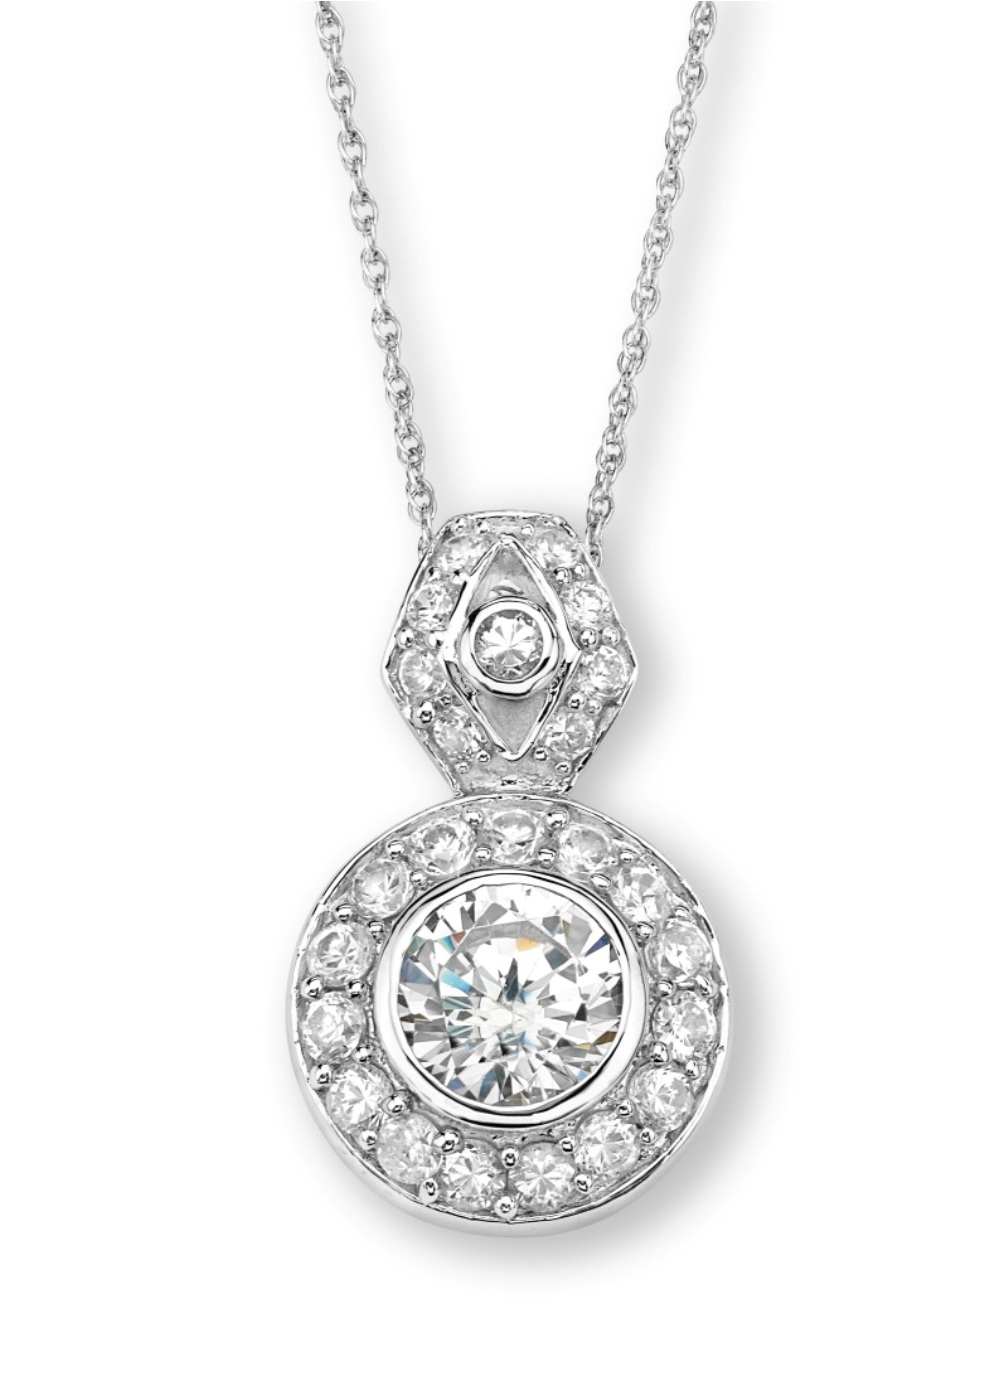 Inlaid Round CZ Pendant Necklace, Rhodium Plated Sterling Silver, 18